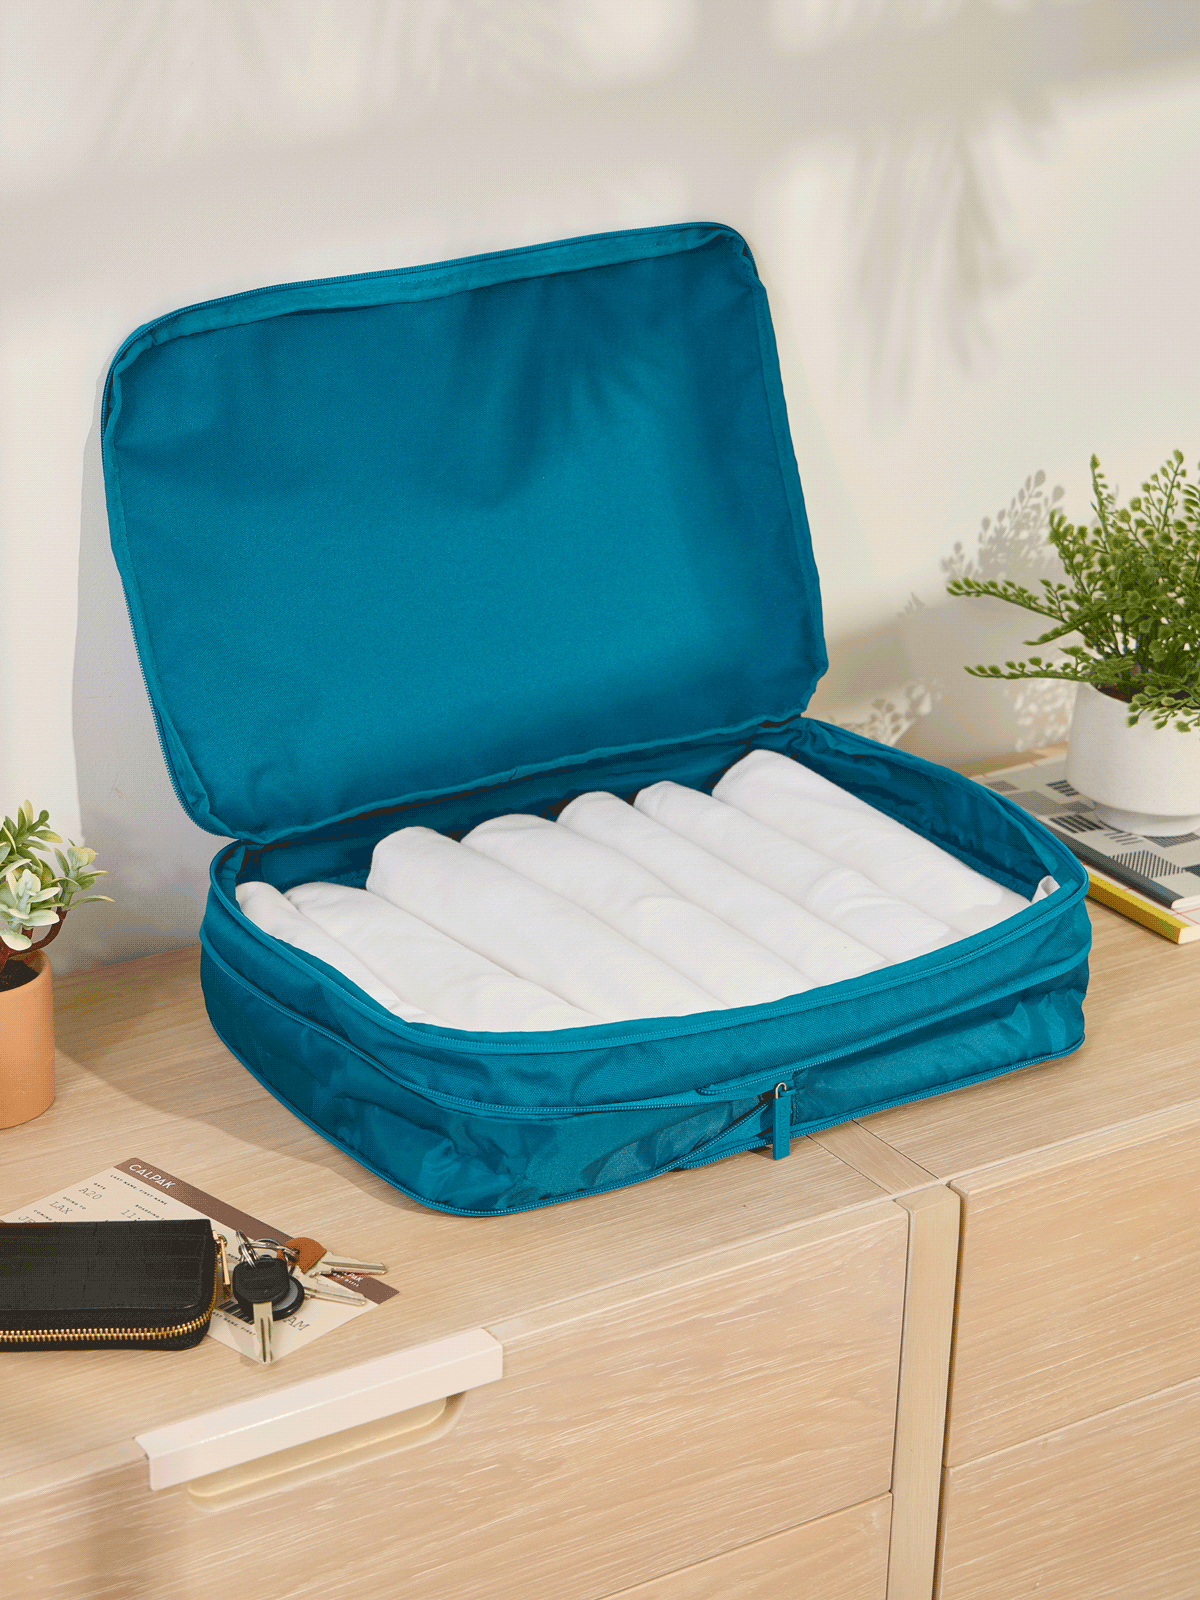 CALPAK Large Compression Packing Cubes made from durable material and expandable by 4.5"